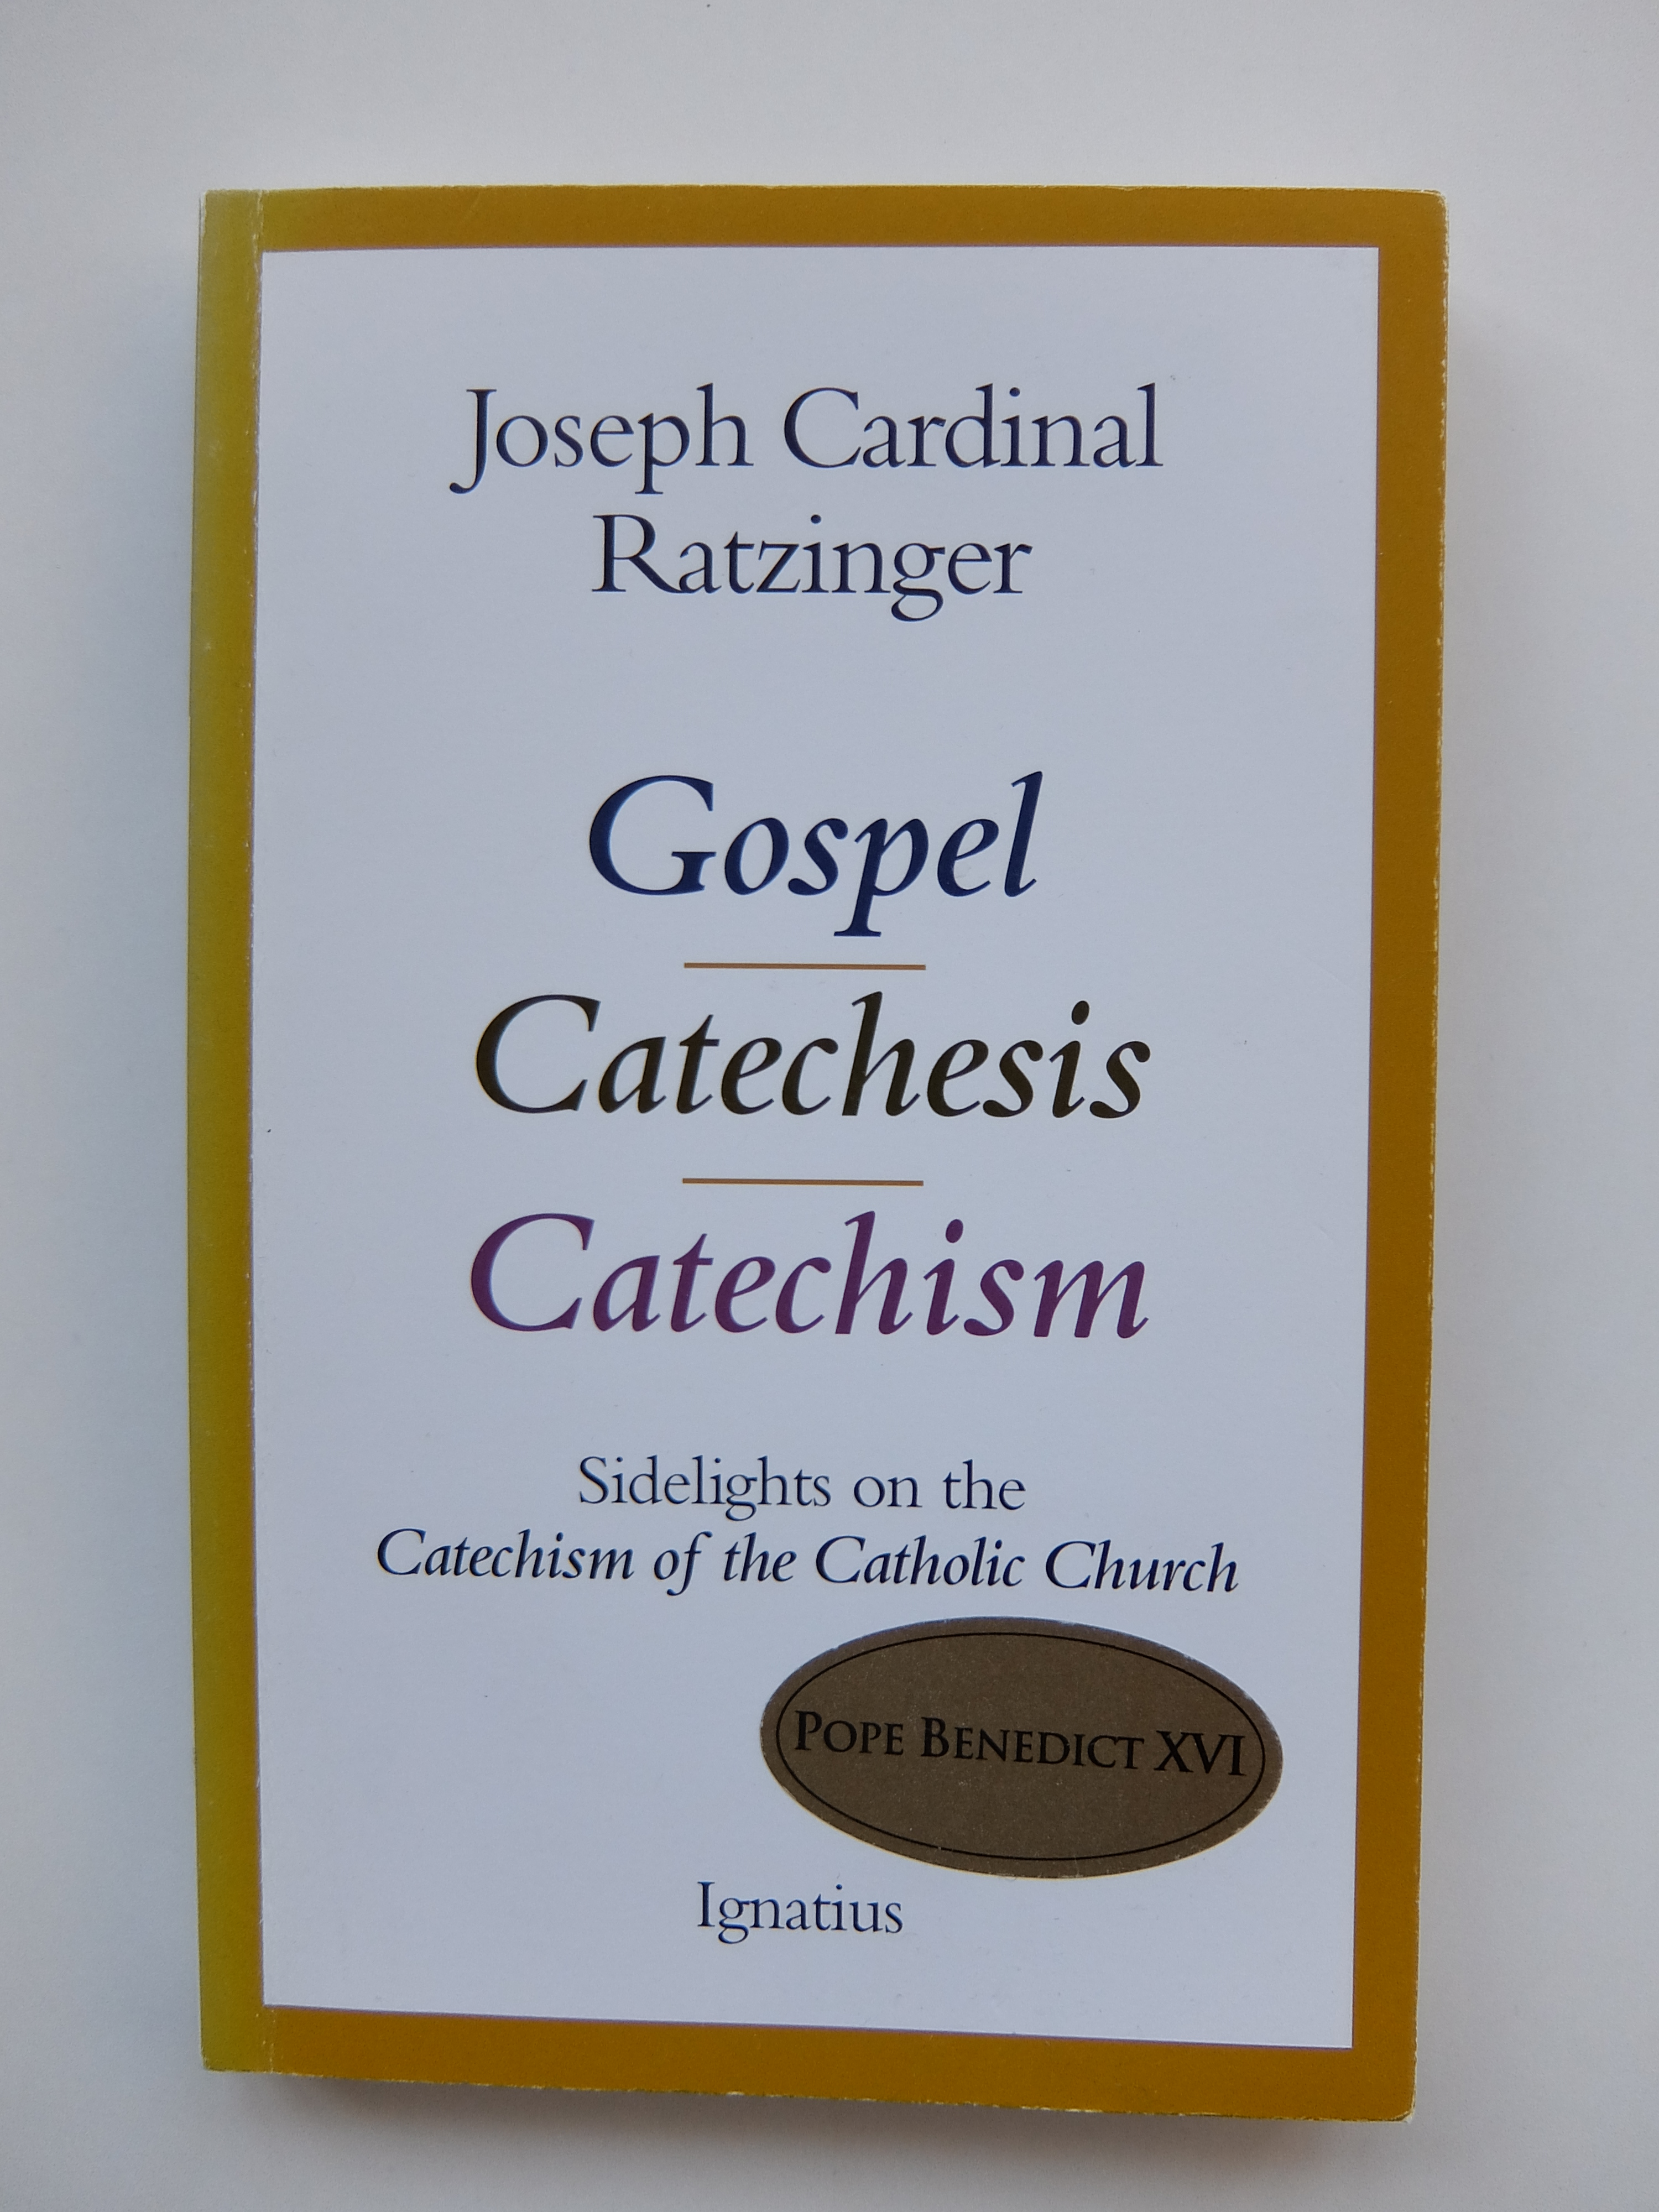 Gospel Catechesis Catechism Image